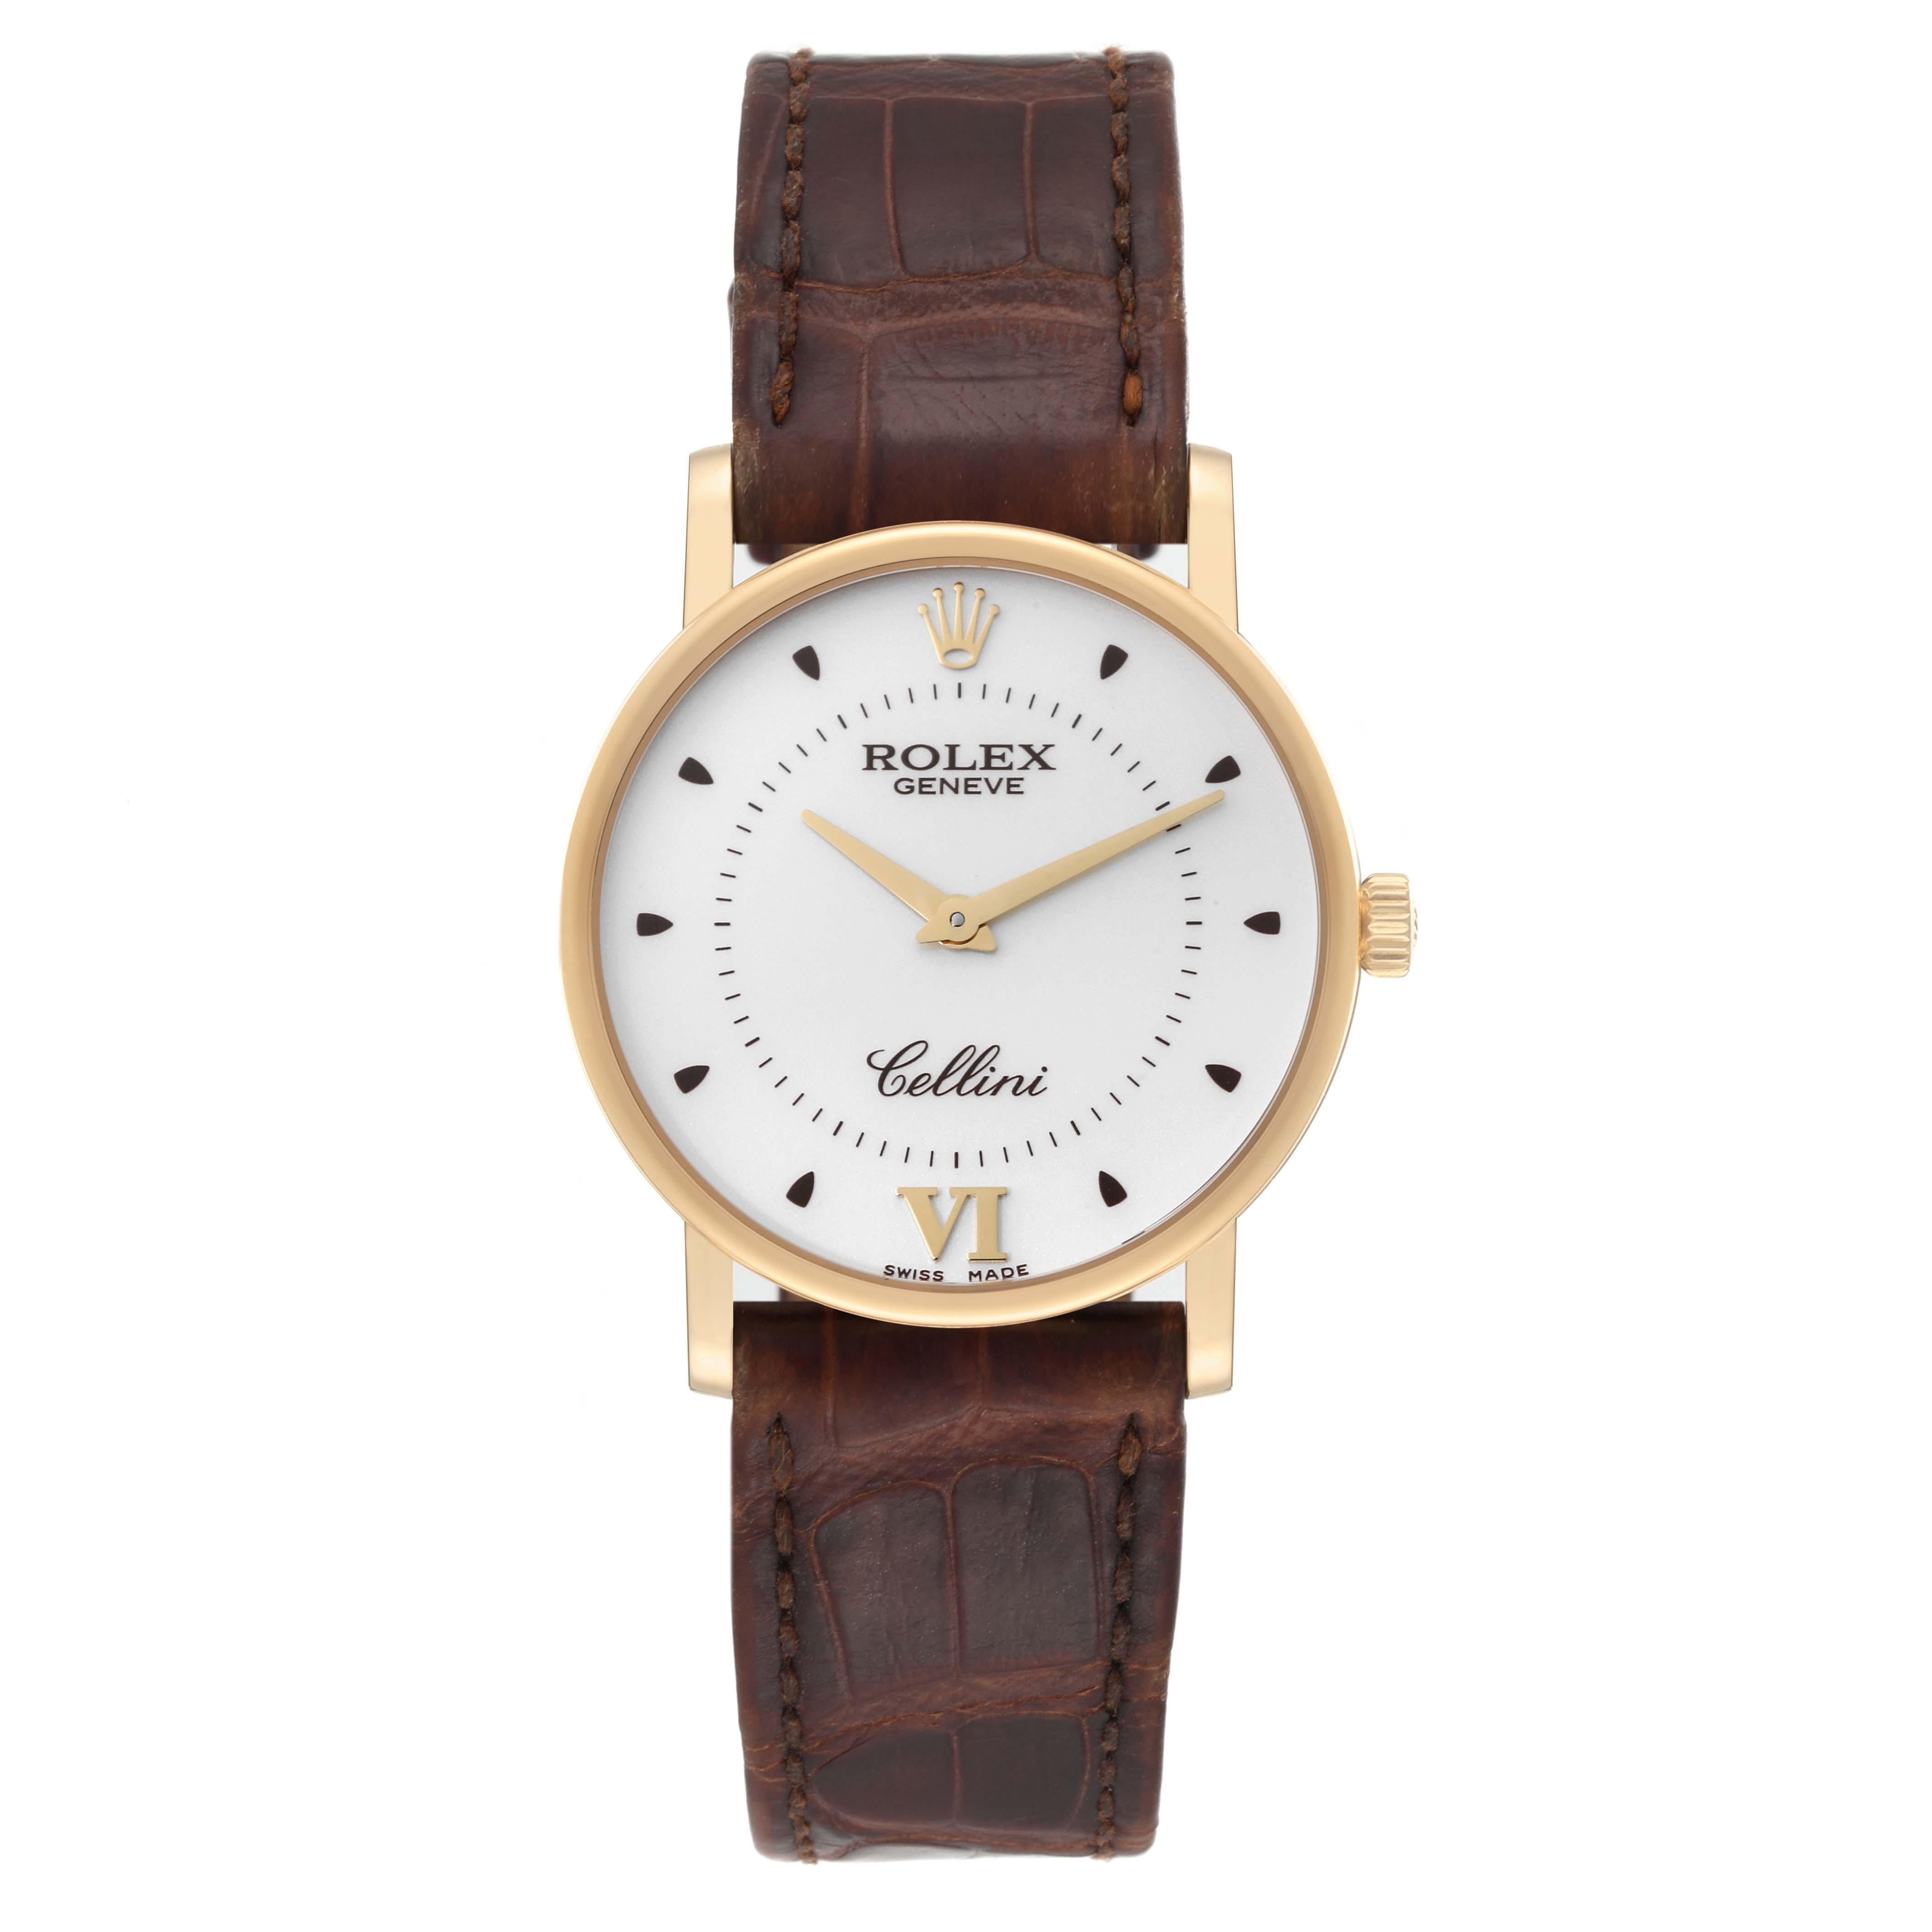 Rolex Cellini Classic Yellow Gold Silver Dial Mens Watch 5115 Card. Manual winding movement. 18K yellow gold slim case 32 mm in diameter. Rolex logo on the crown. . Scratch resistant sapphire crystal. Flat profile. Silver dial with black dot hour